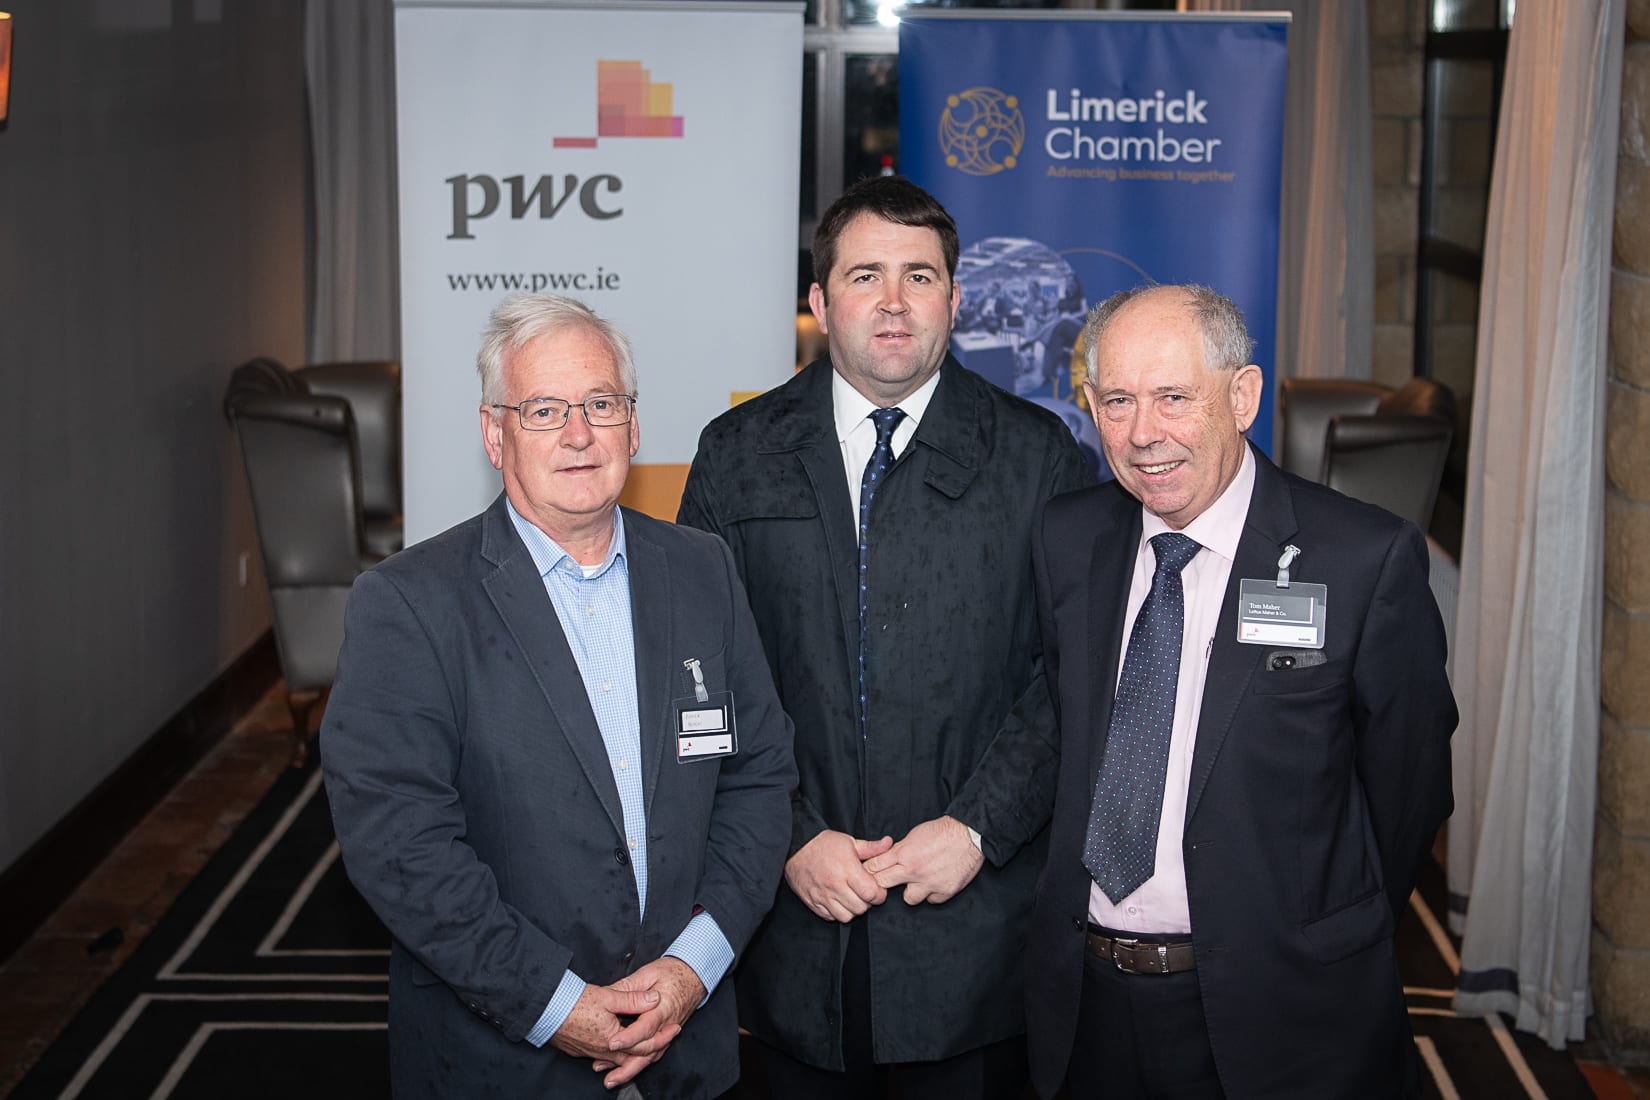 PWC Budget Breakfast in association with the Limerick Chamber which took place in the Castletroy Park Hotel on 9th October 2019, from left to right: Paddy Halton - True North Technologies, Colin Kearney - Adare Manor, Tom Maher - Loftus Maher Accountants.